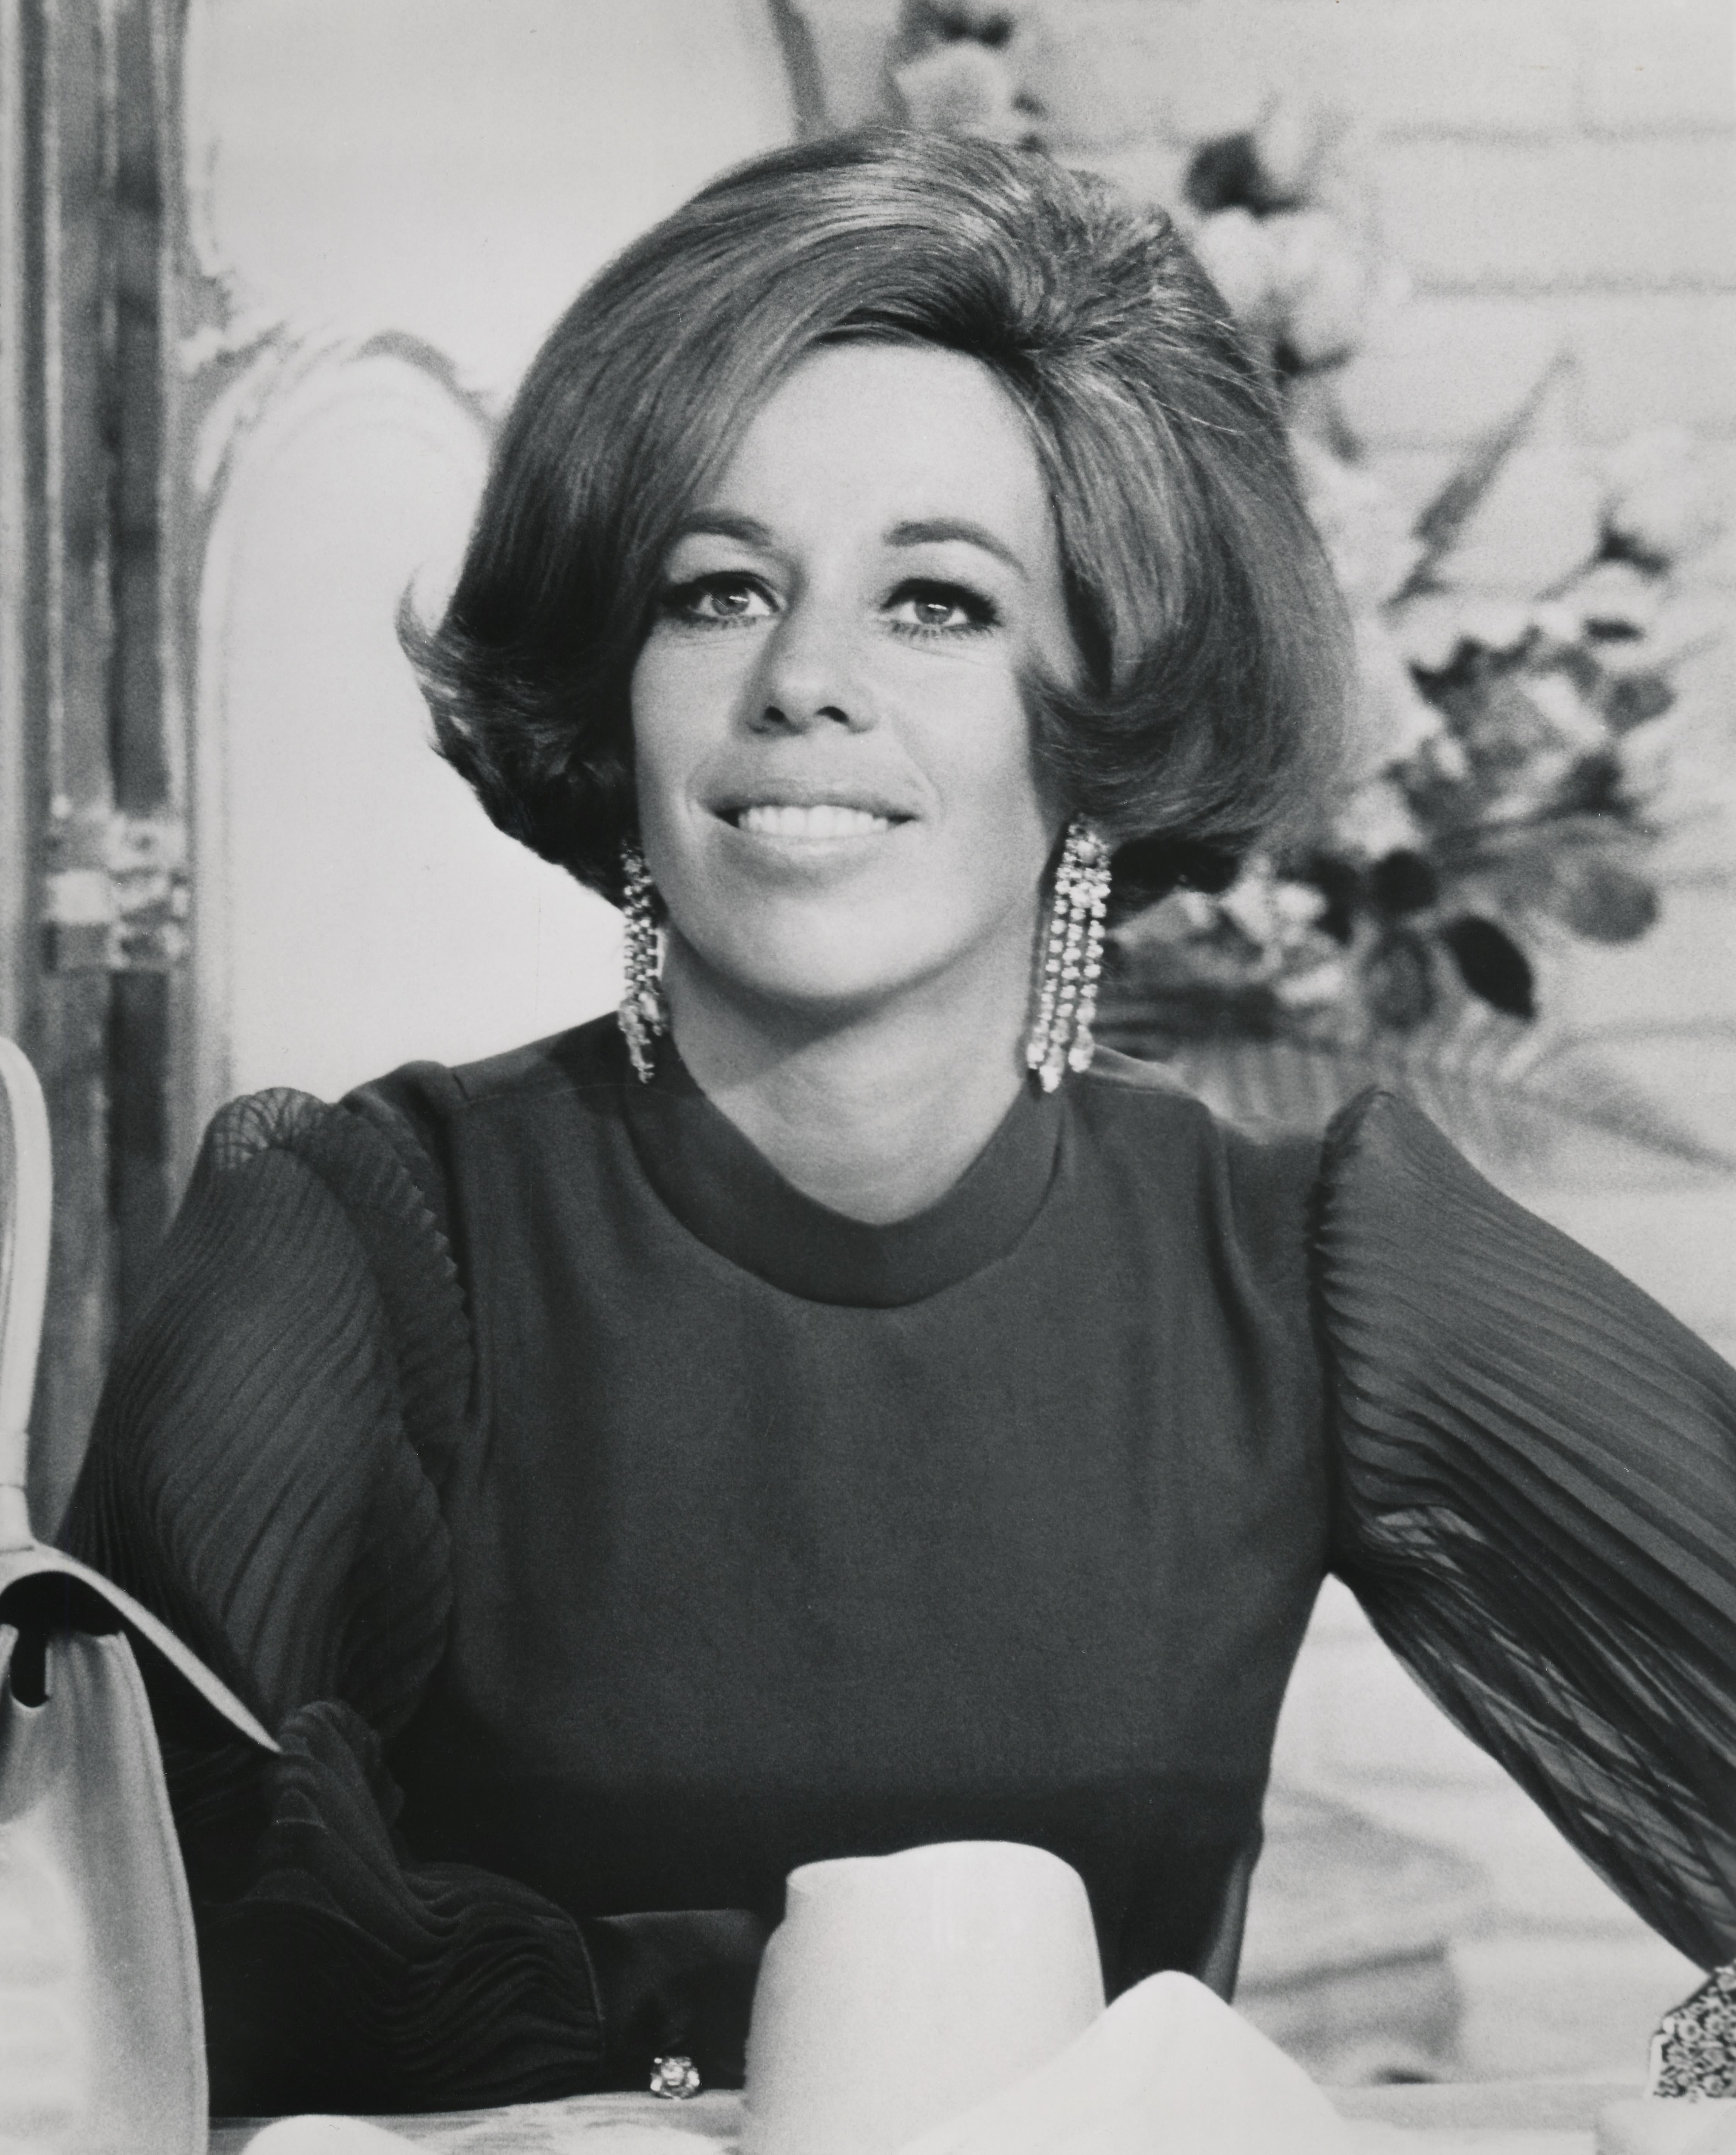 Unknown Portrait Photograph - Quirky Carol Burnett Candid and Smiling Fine Art Print